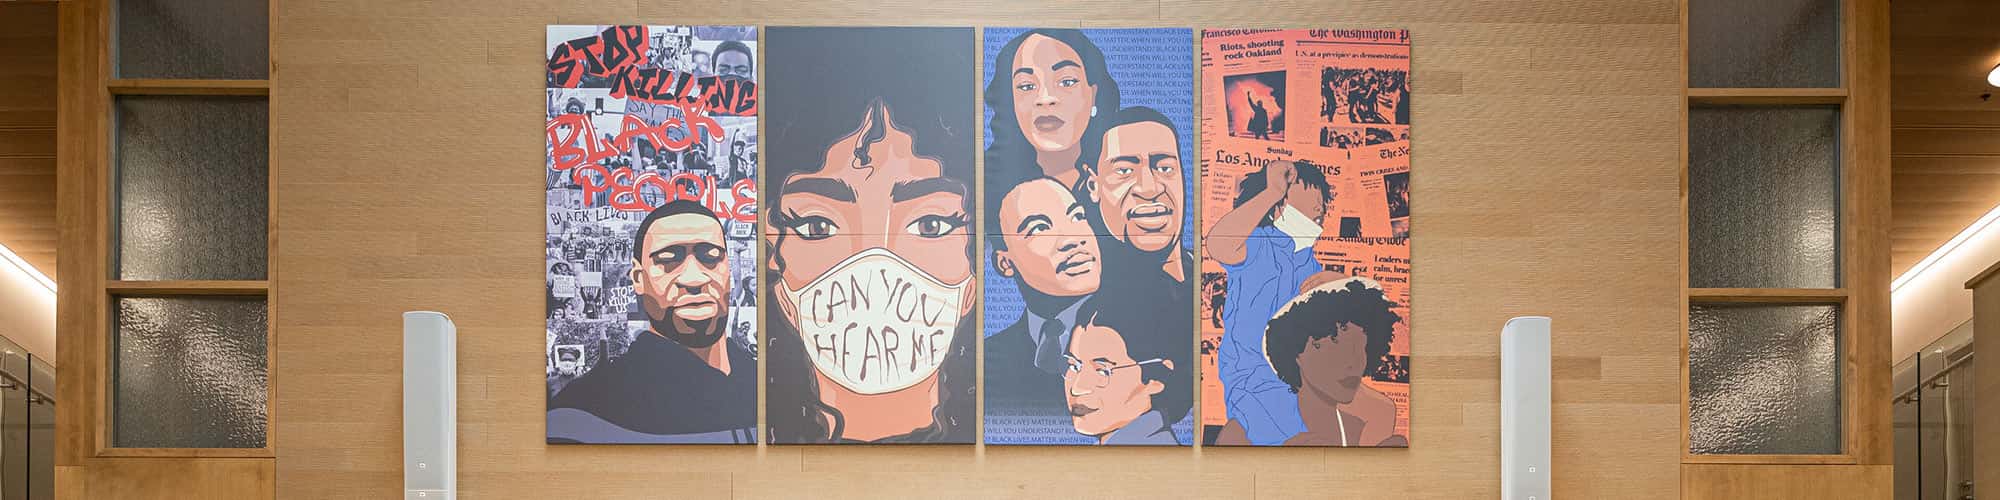 Black Lives Matter mural created by students in Moffett Center